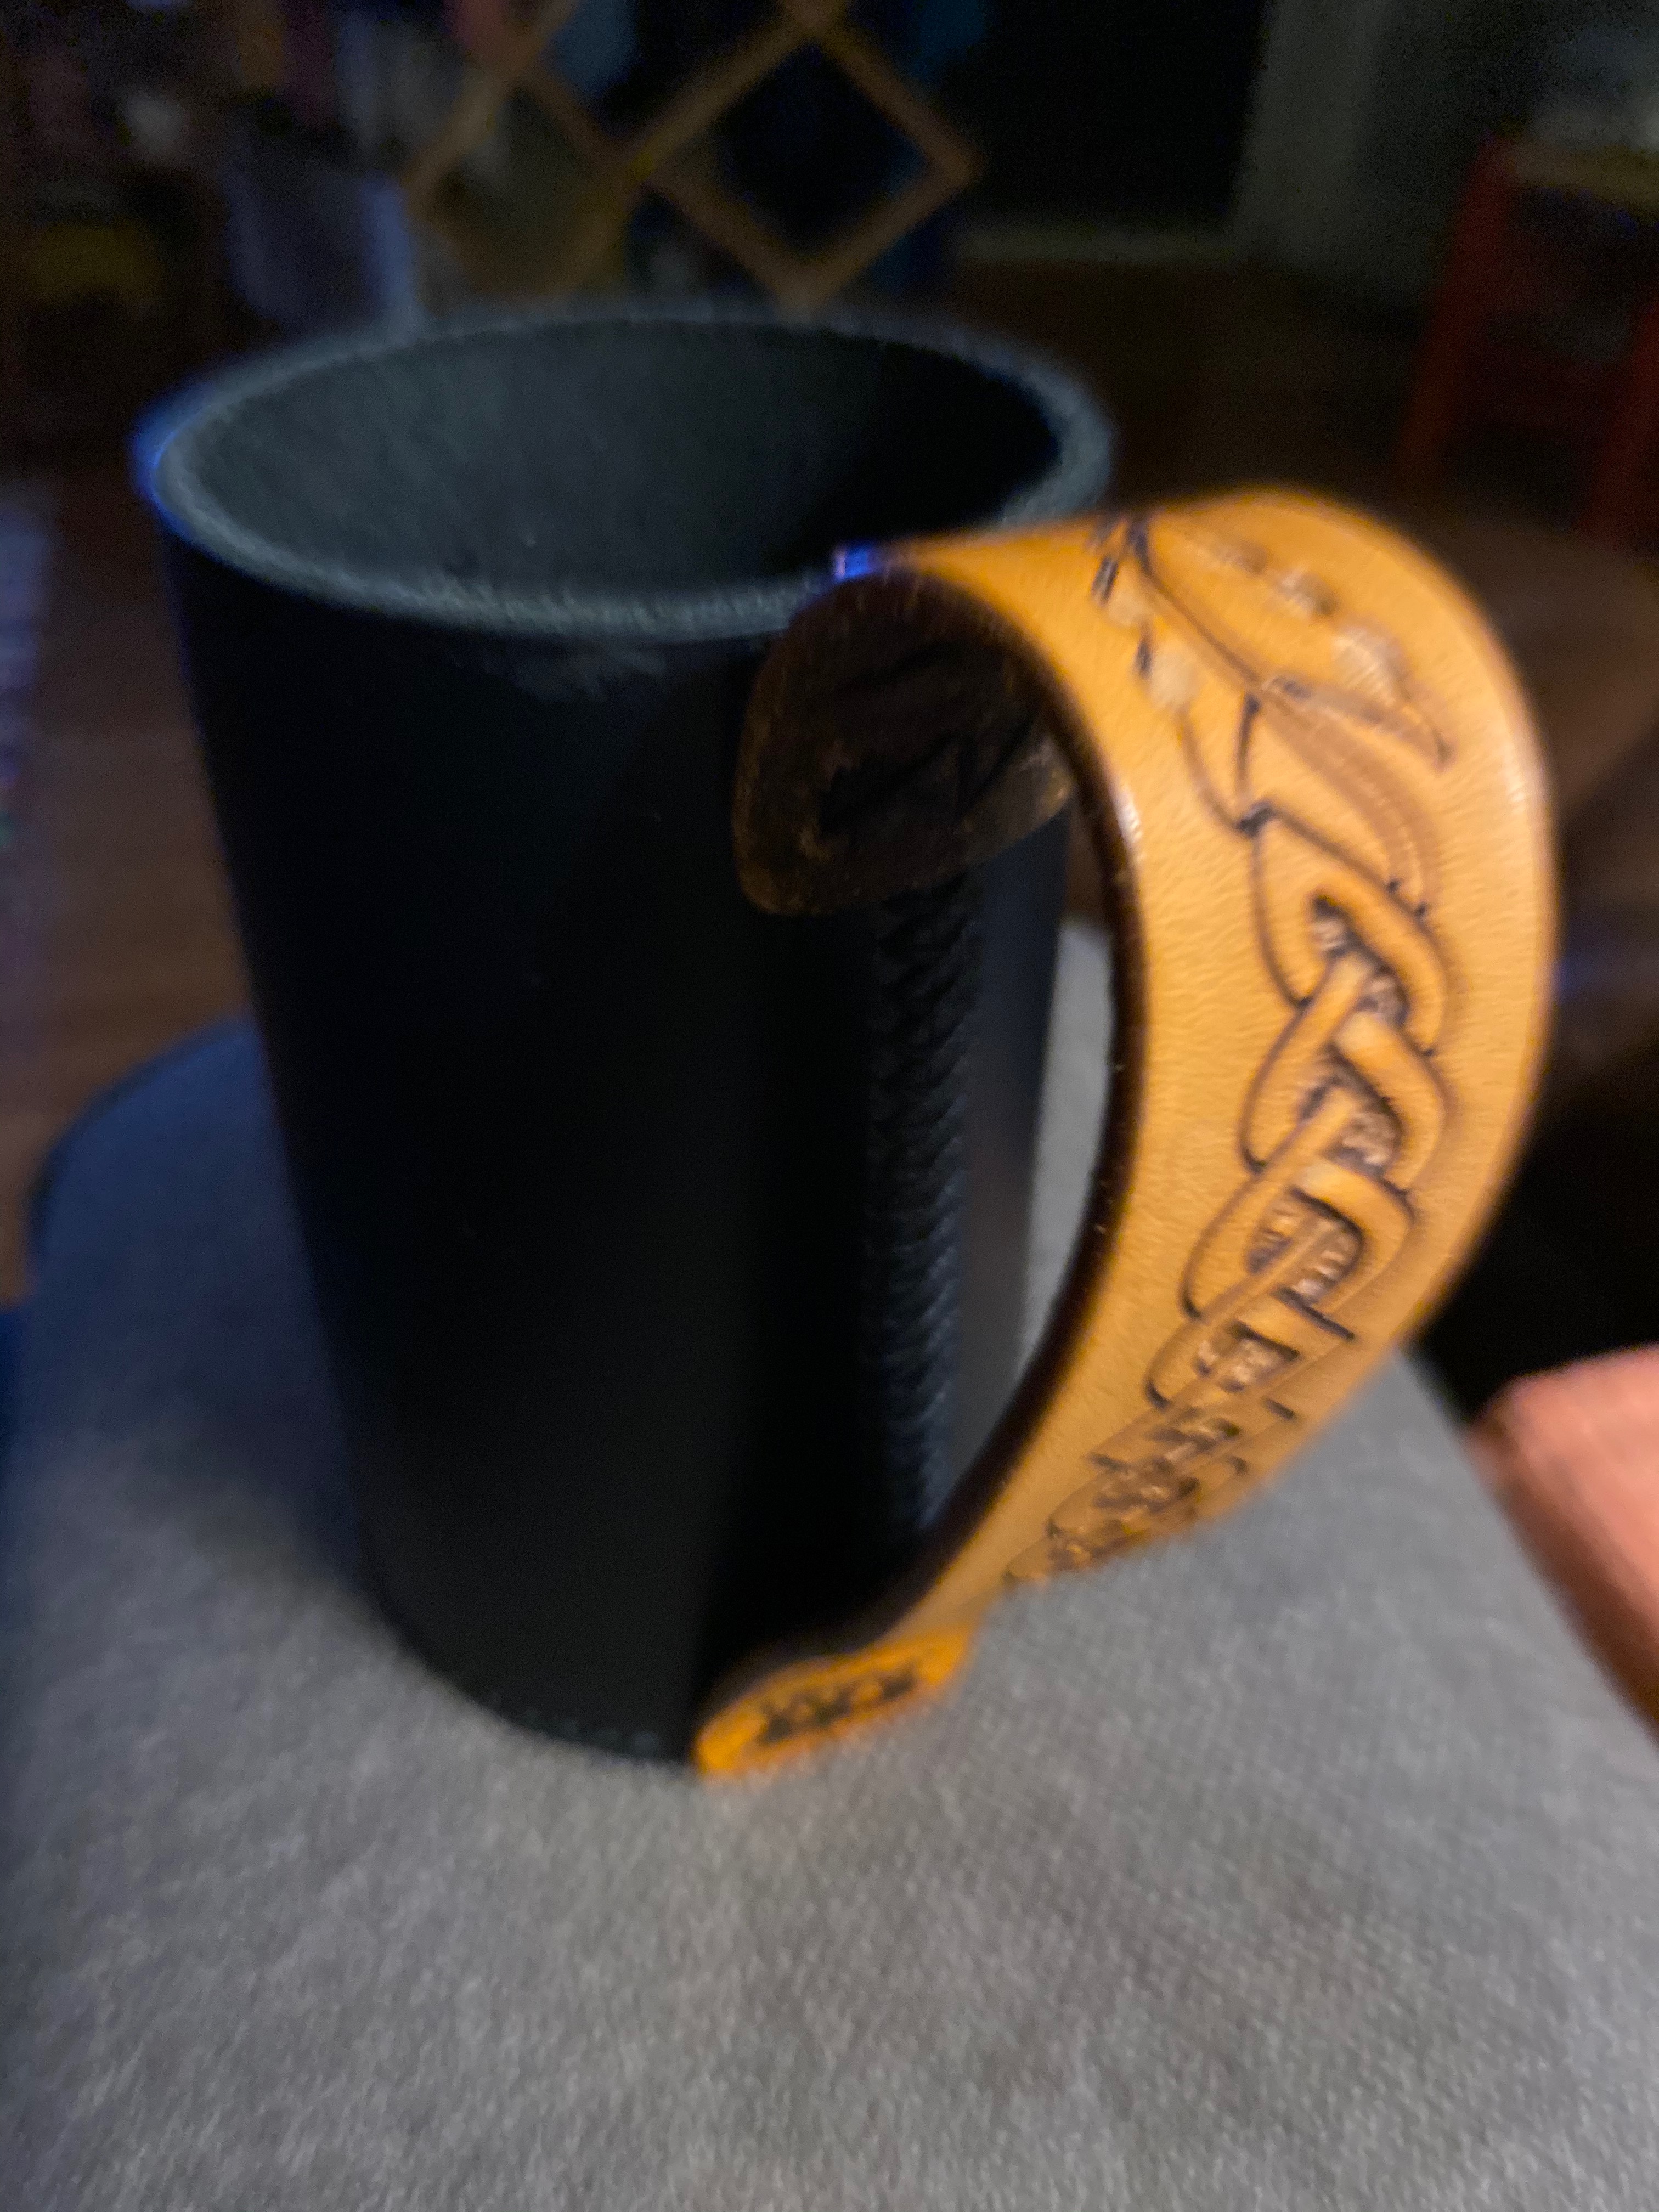 First coozie handle